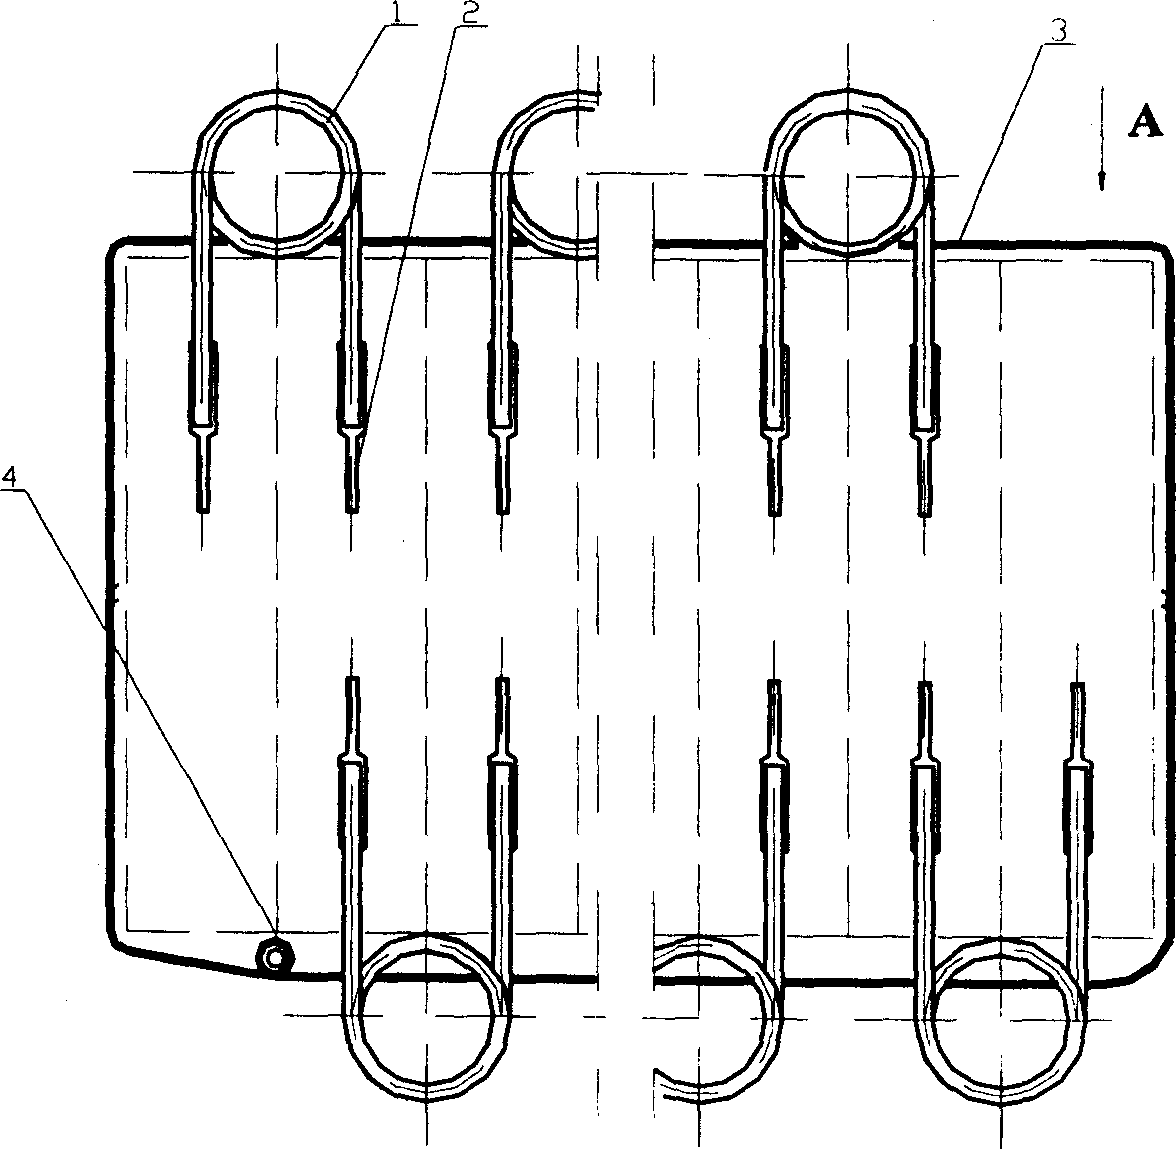 Mechanism for outspreading sailboard of solar cell